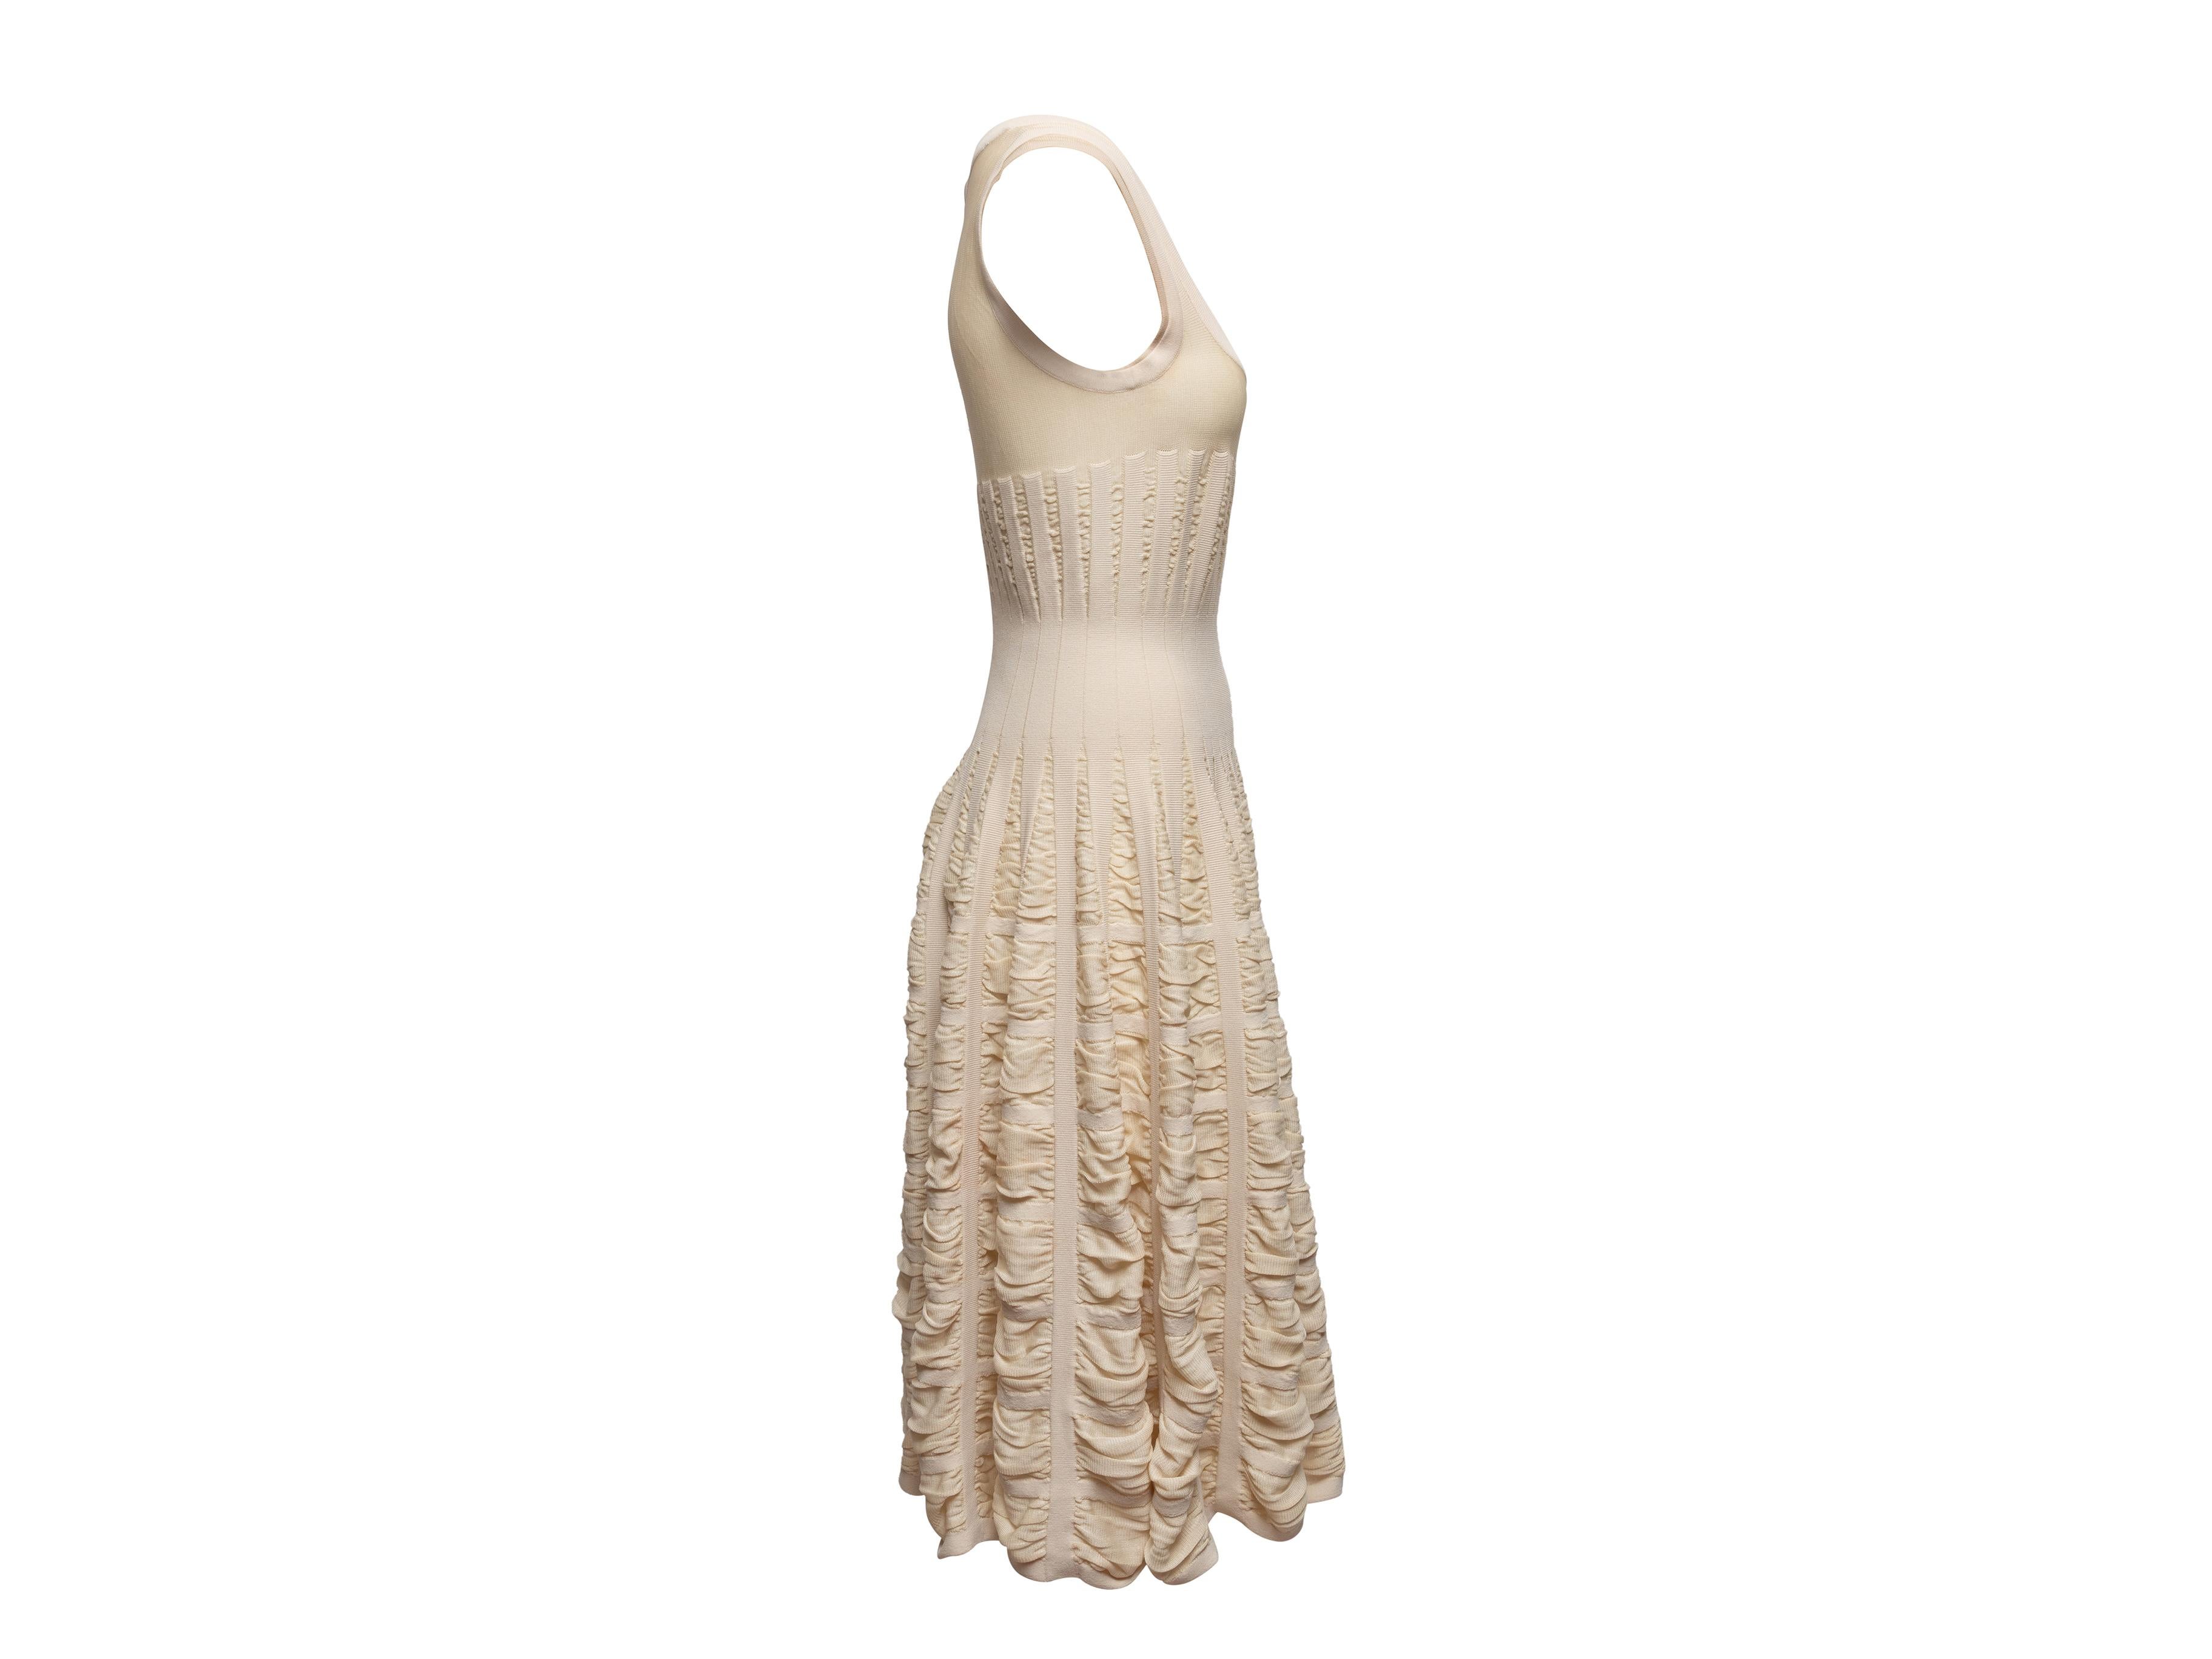 Product Details: Cream sleeveless ruched dress by Alaia. Scoop neckline. Zip closure at back. 30